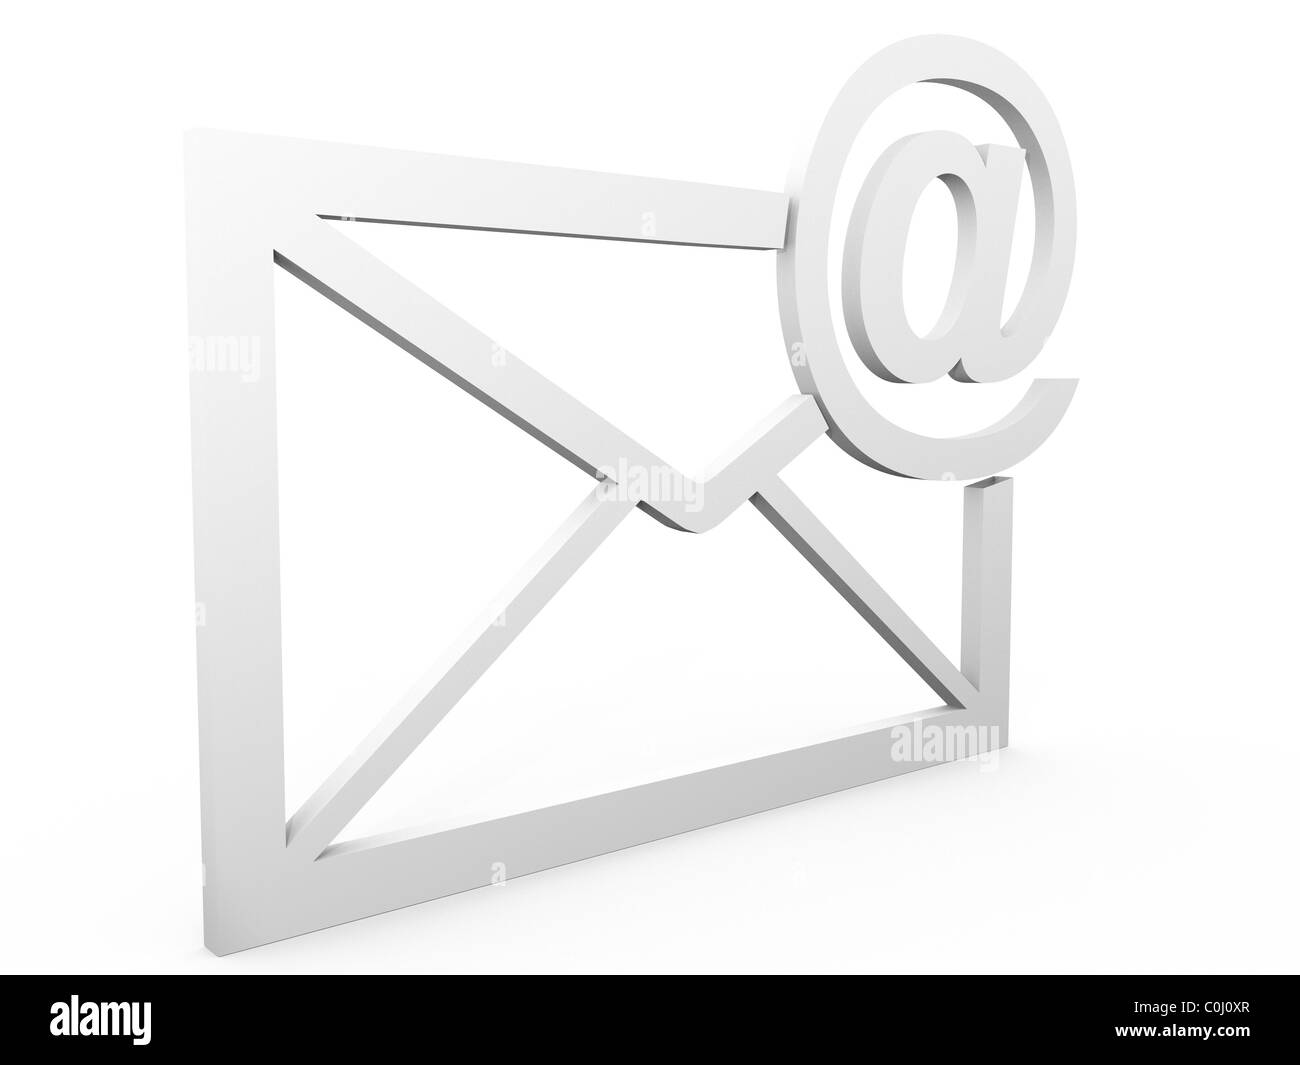 E-mail as letter with alias sign on a corner Stock Photo